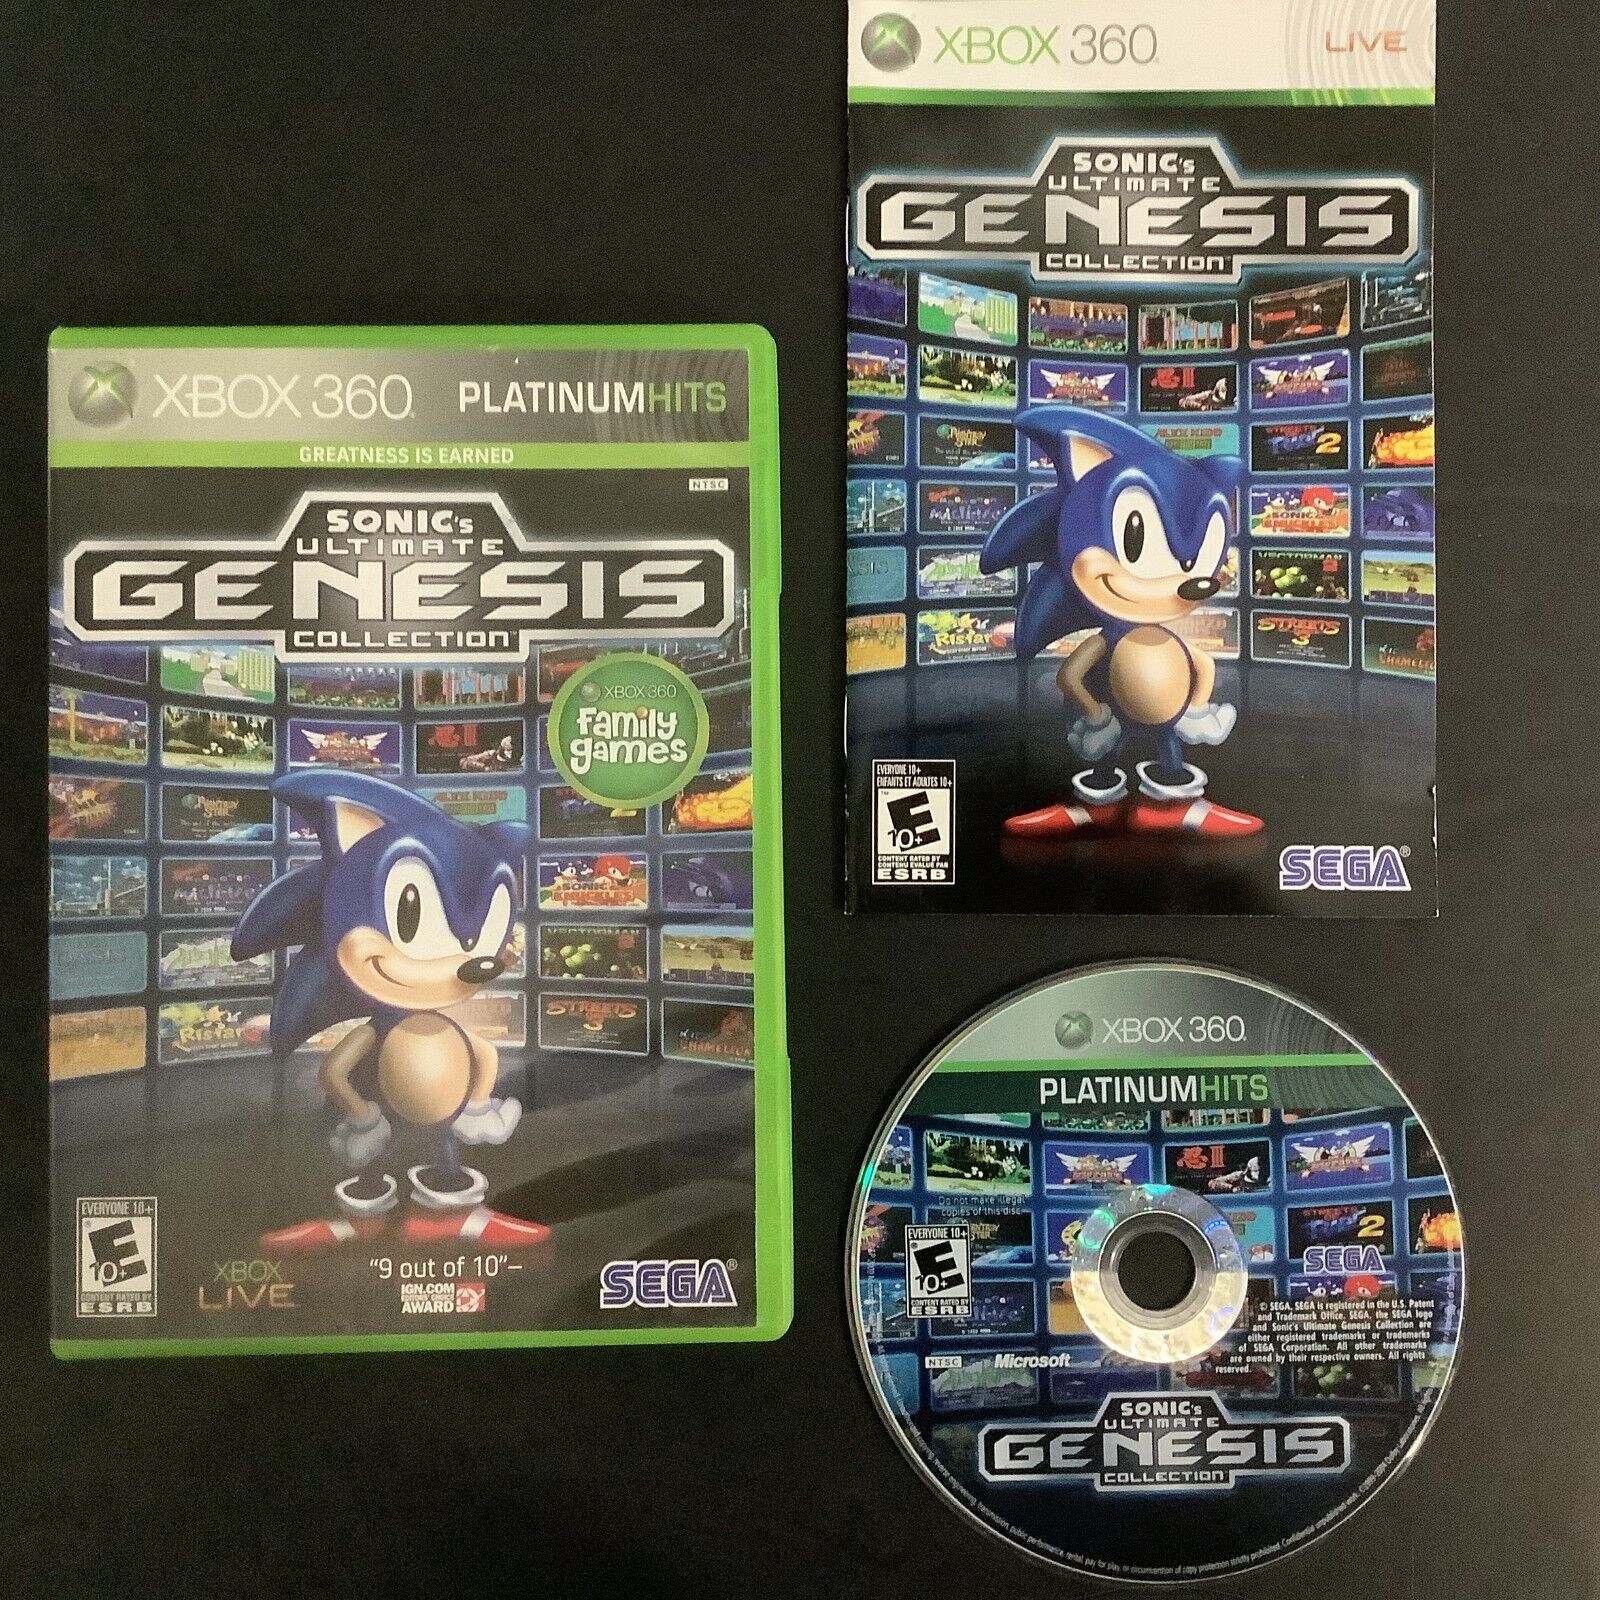 Sonics Ultimate Genesis Collection Xbox 360 Game